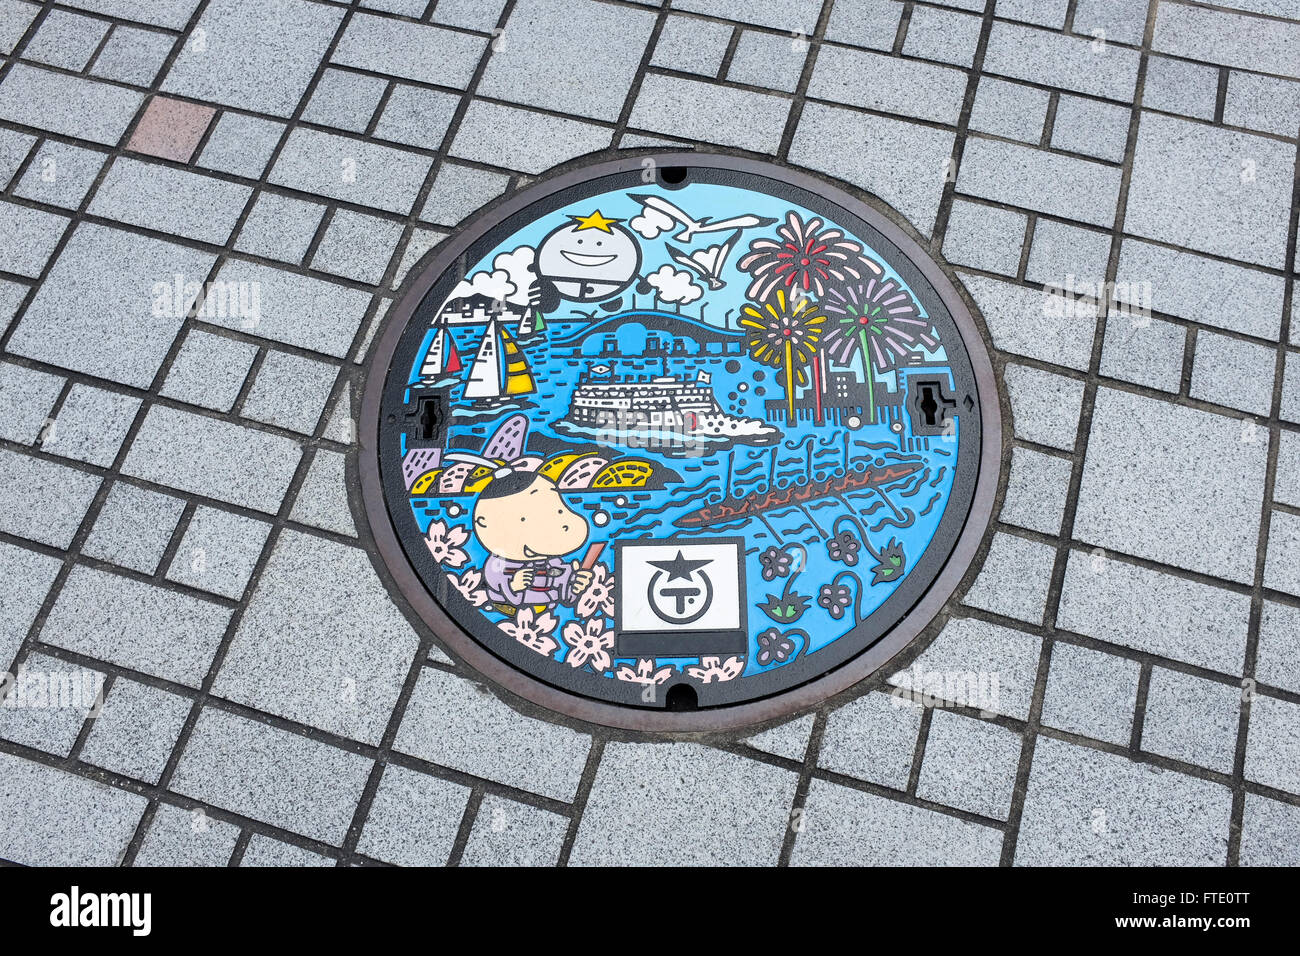 A manhole cover in Japan. Stock Photo